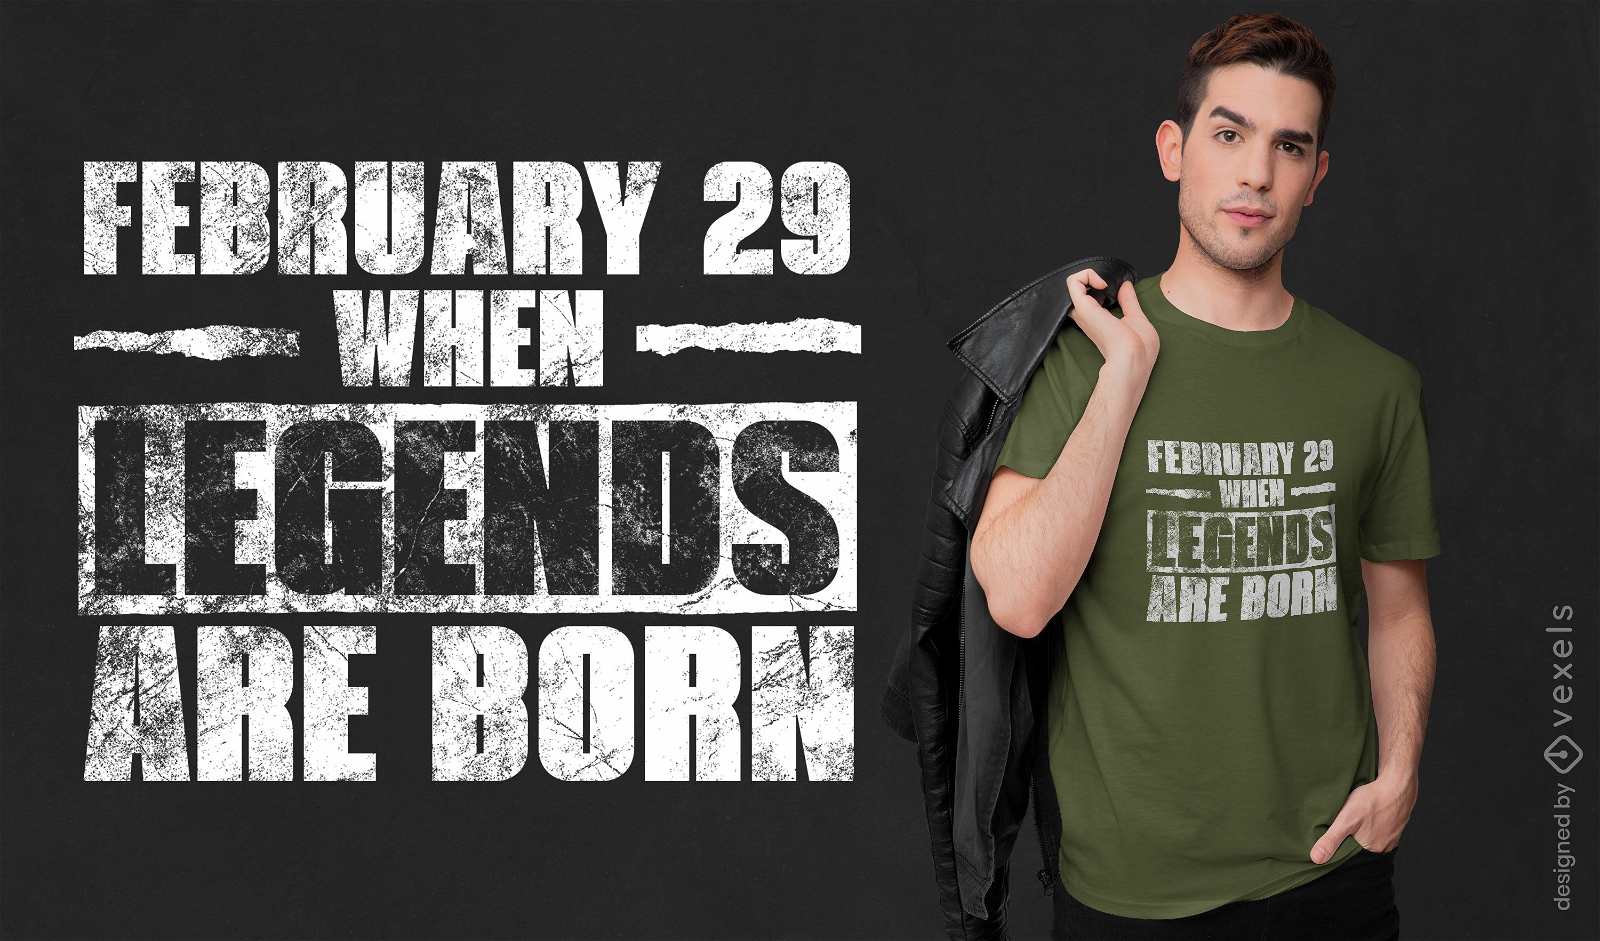 Leap day birthday quote t-shirt design